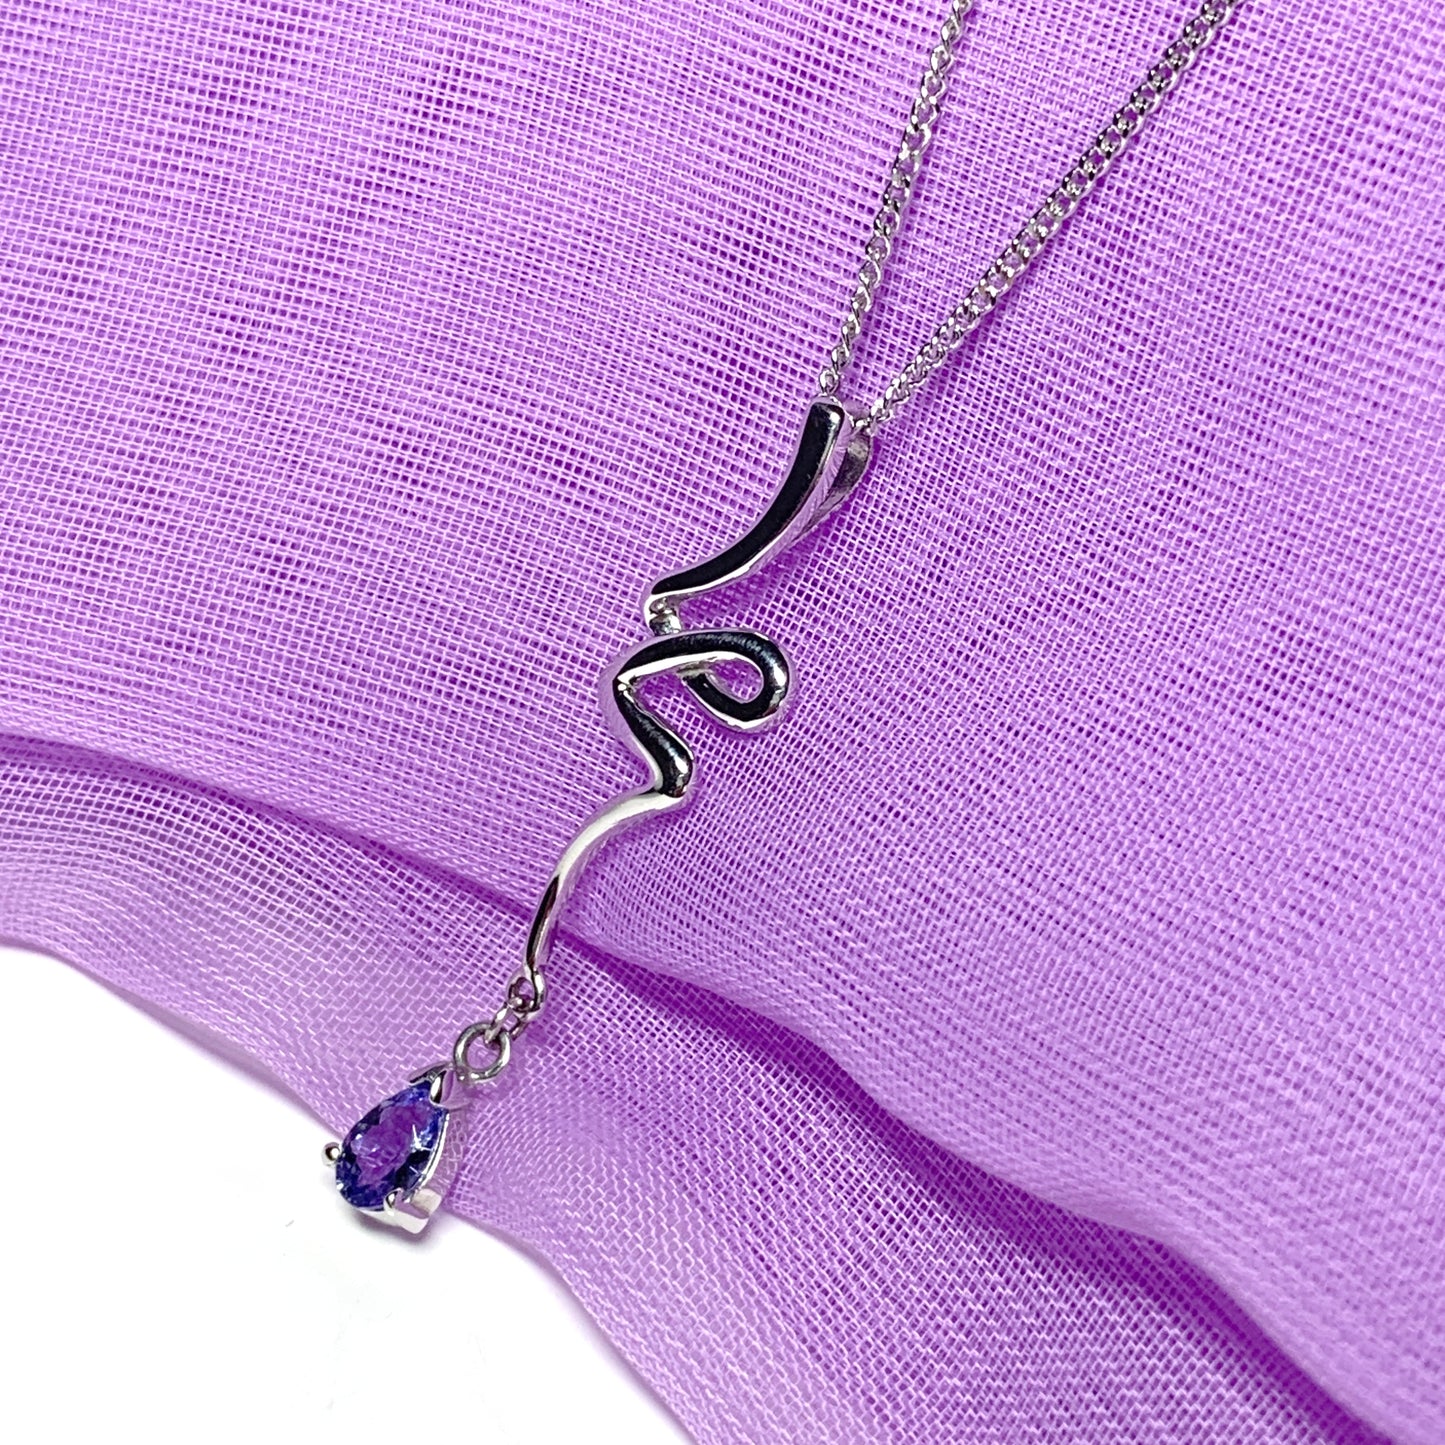 Real tanzanite white gold fancy swirl necklace pear shaped